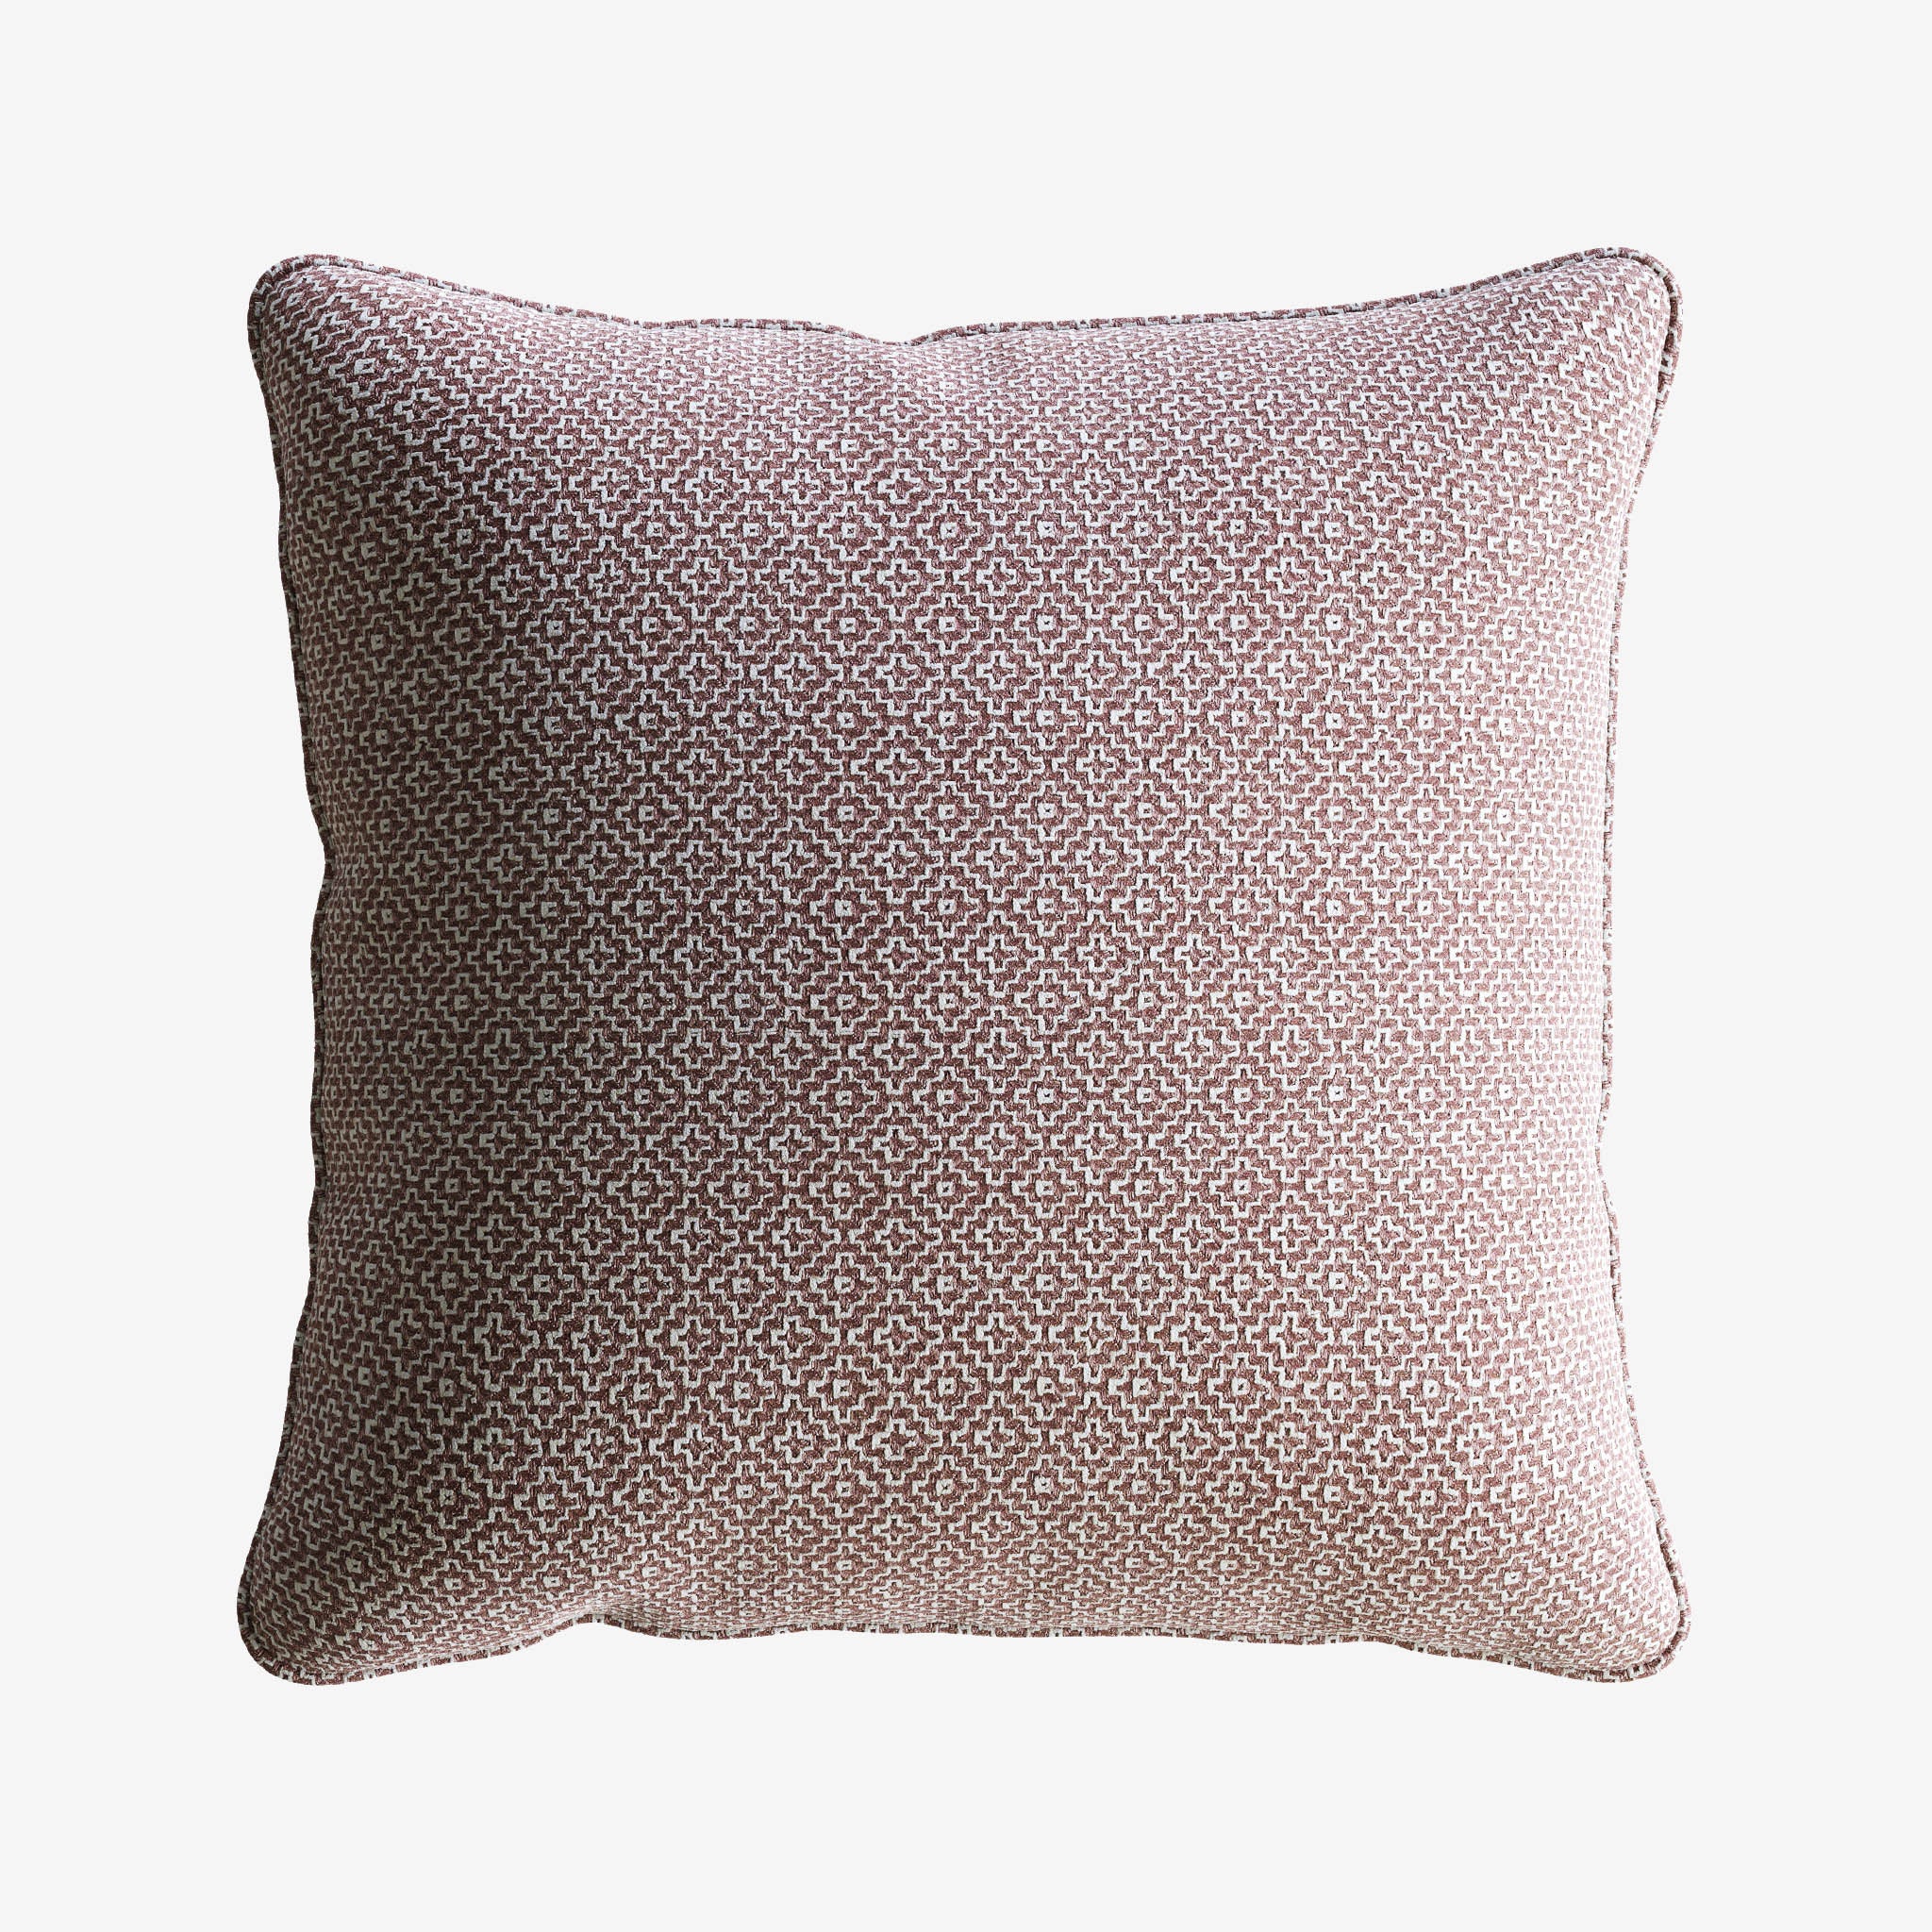 Luxury Cushion, pink Fabric, small-scale geometric pattern, Bedroom, Living Room